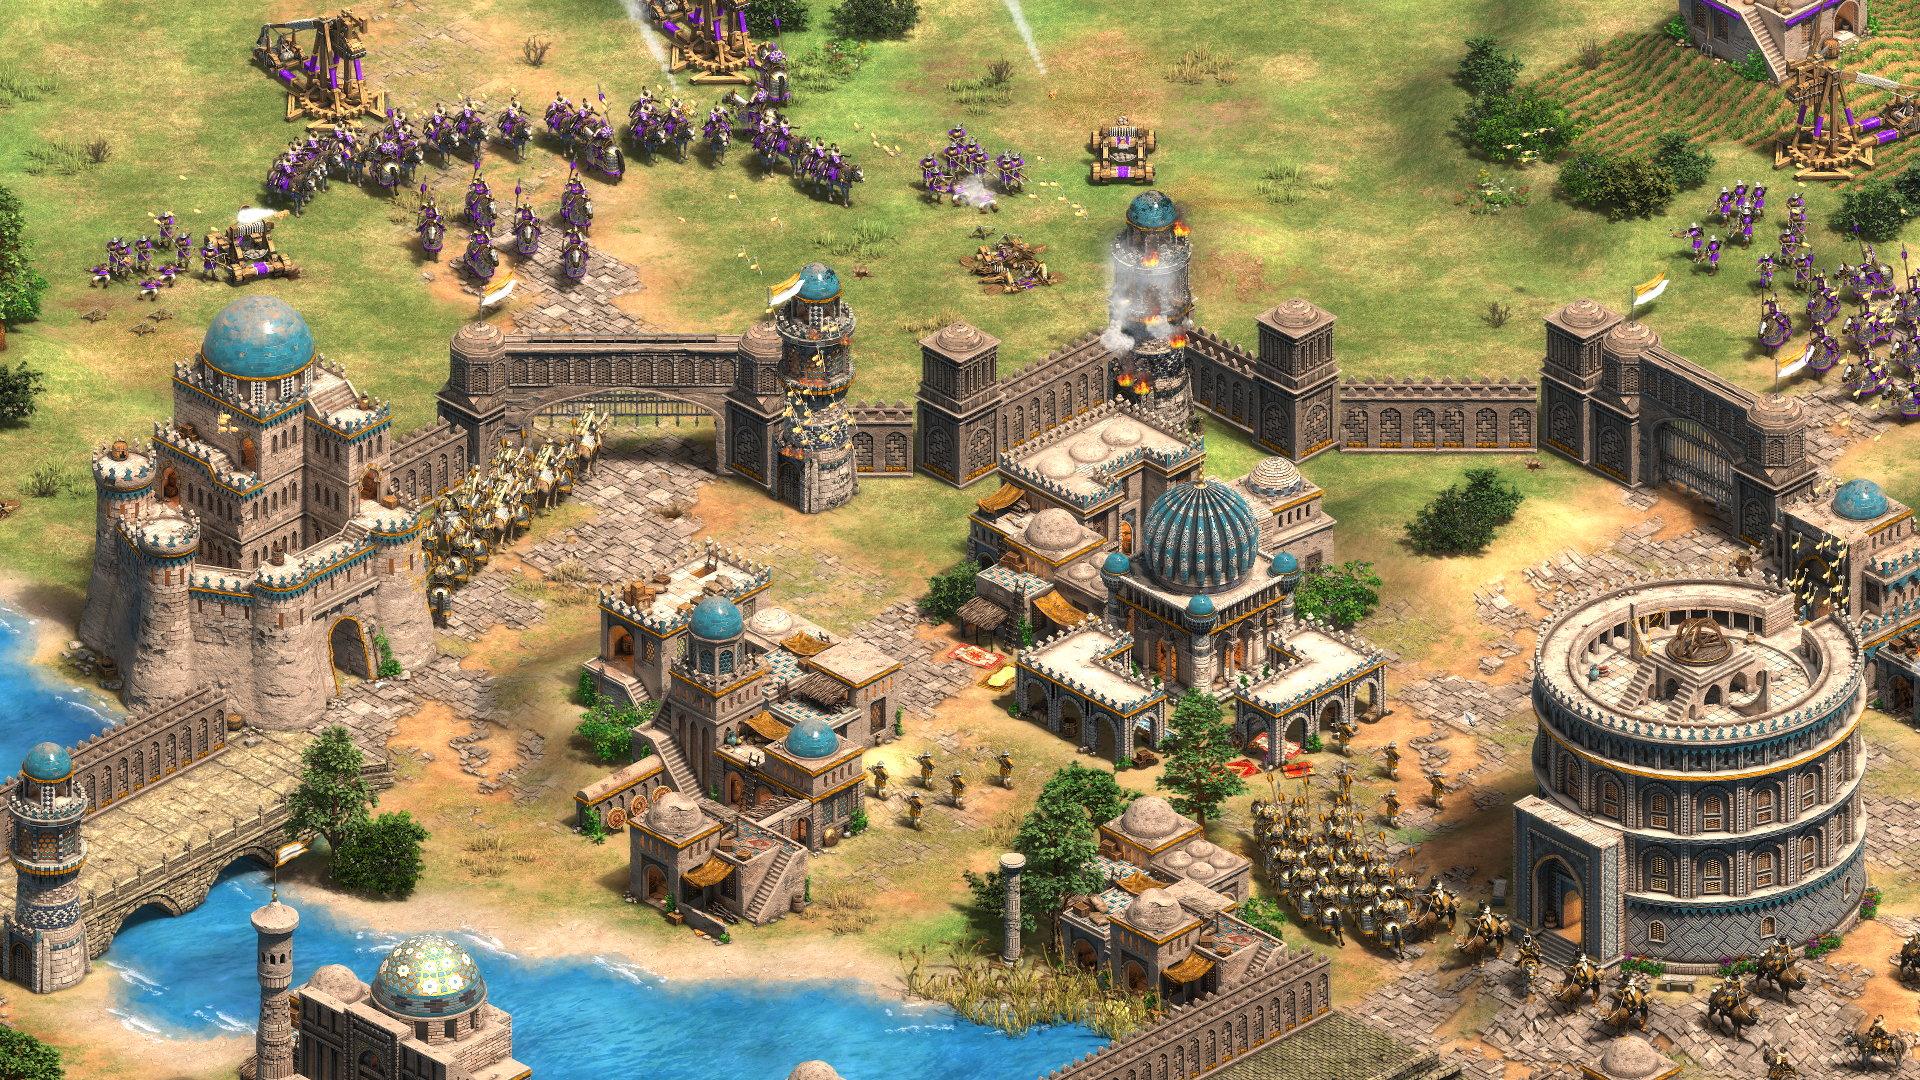 Age Of Empires 2: Definitive Edition shown off at E3. Rock